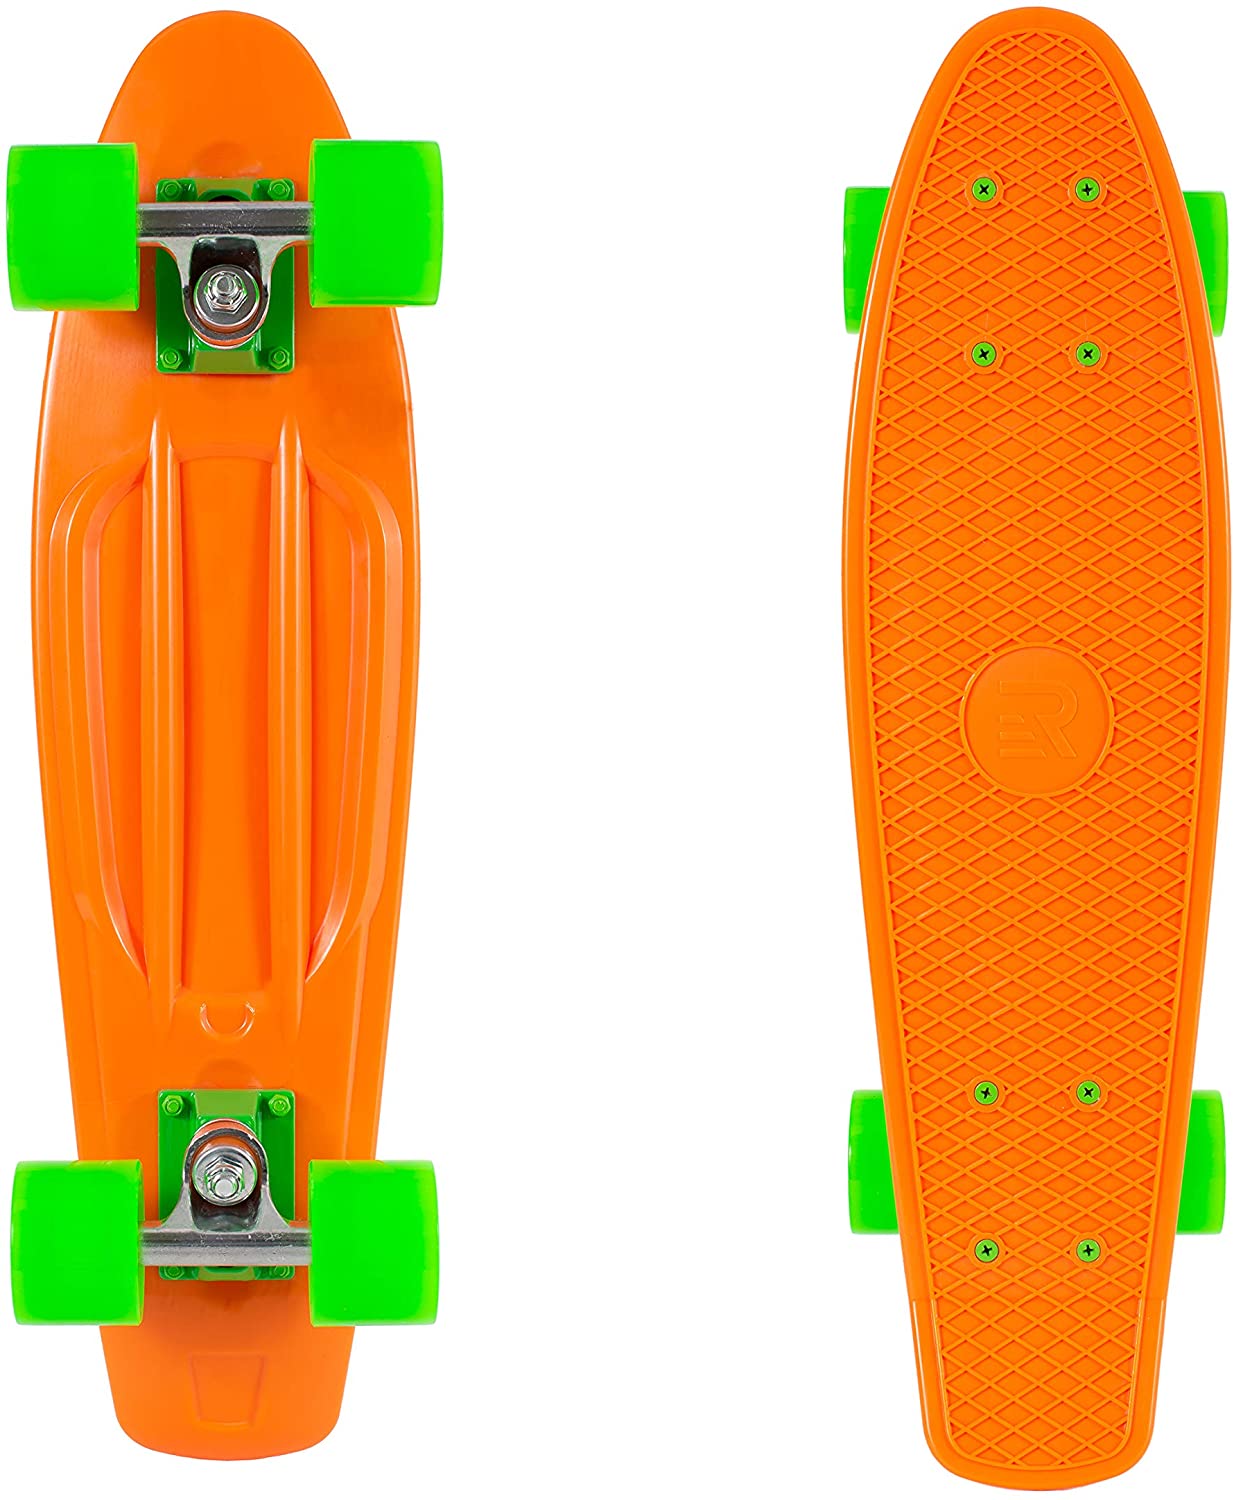 The 7 Best Kids' Skateboards According to Real Parents - FamilyEducation